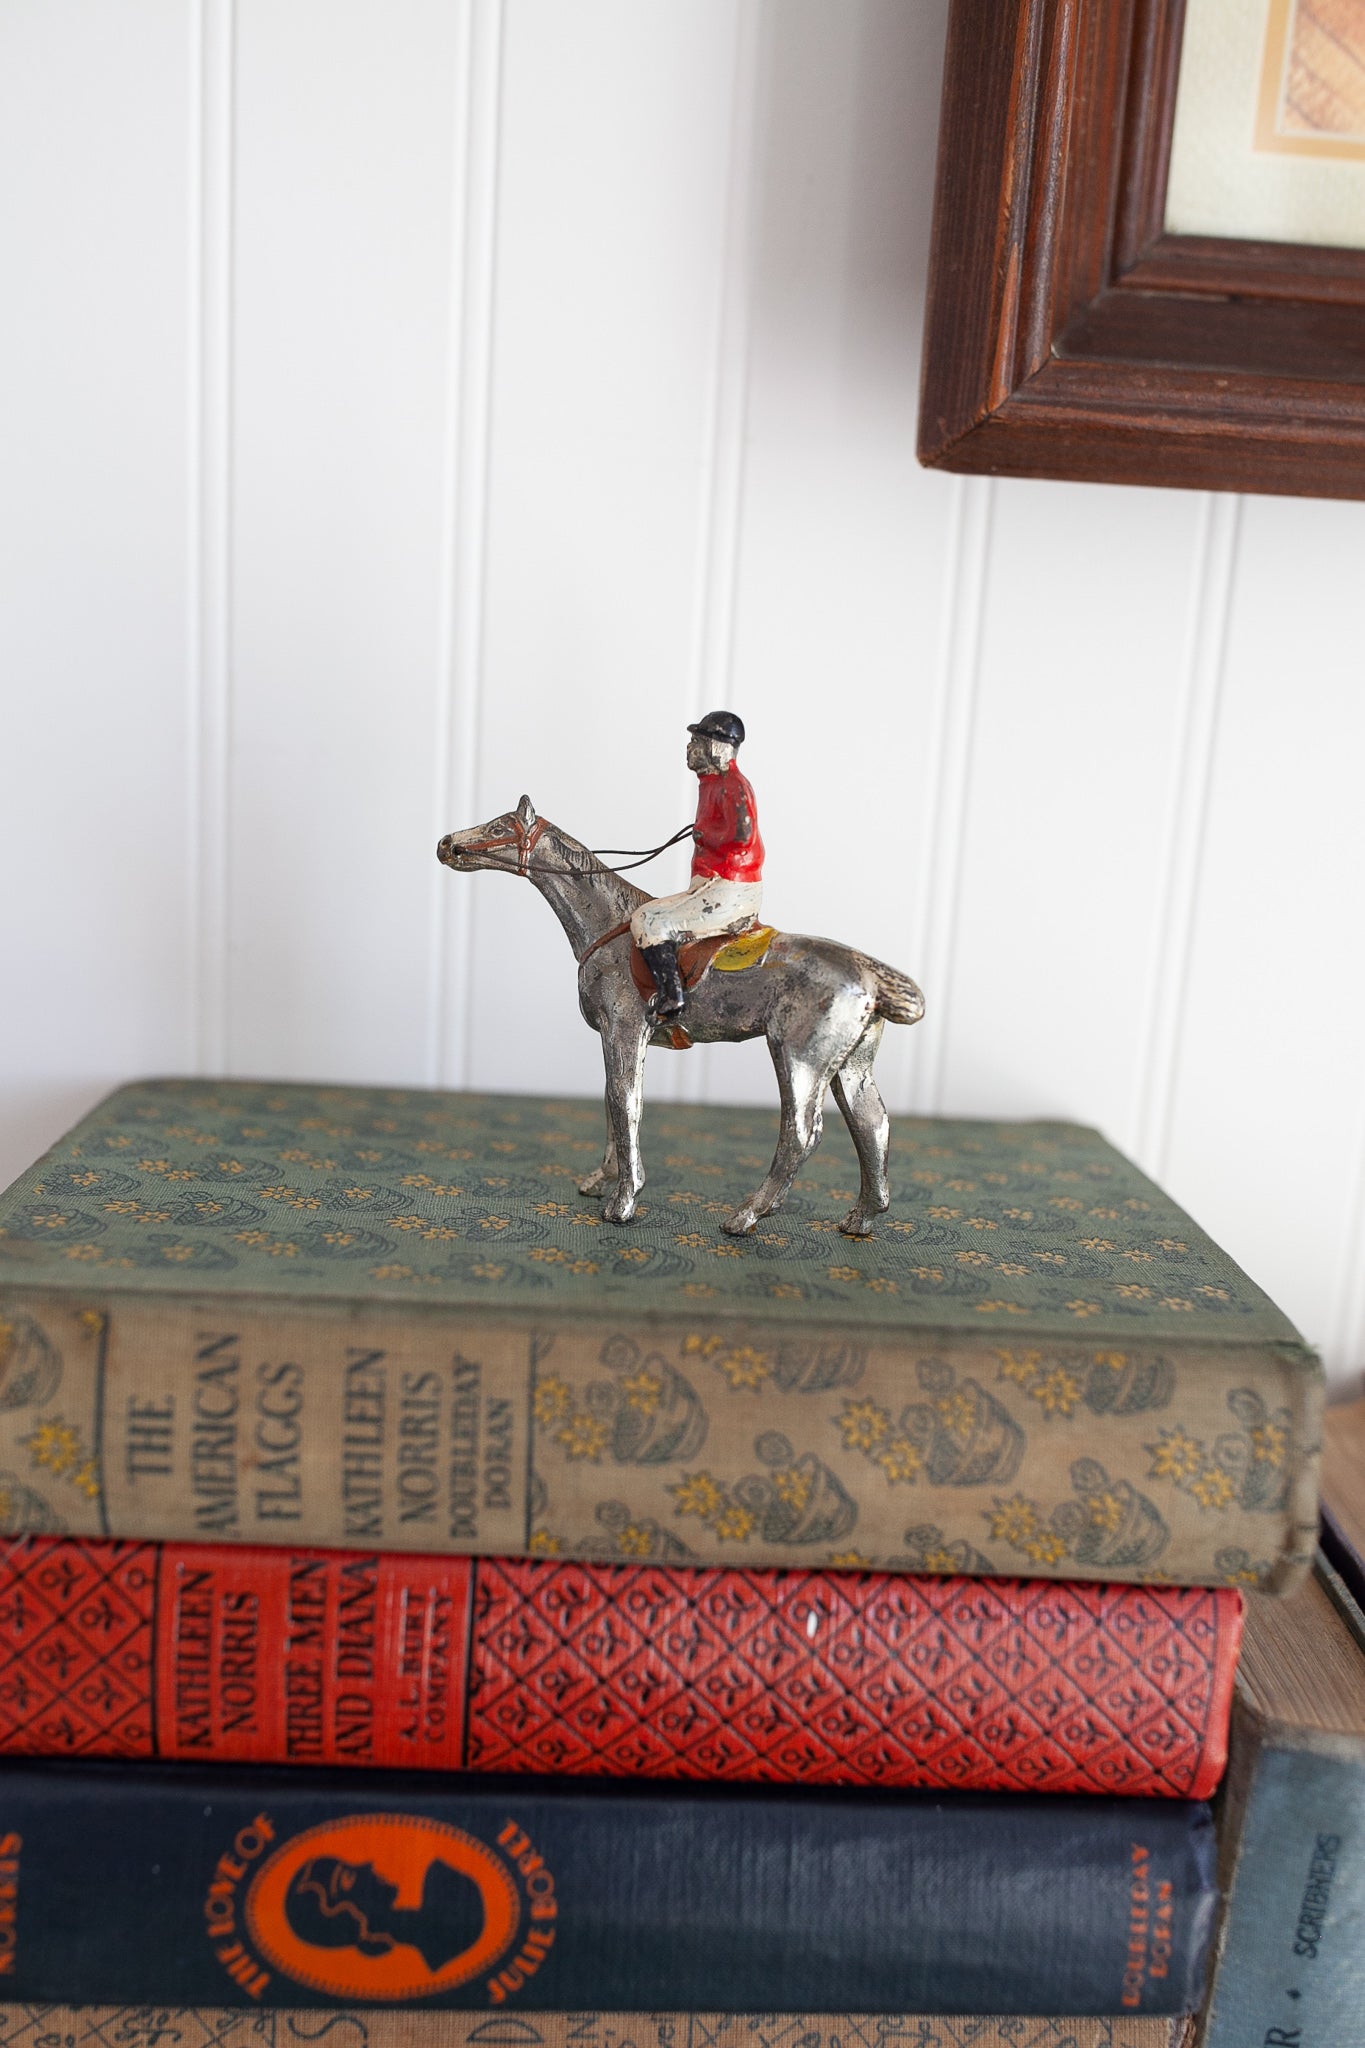 Vintage Japan Cast Iron Lead Silver Painted Horse &Jockey Childs Play Toy Figure - 3.25" tall